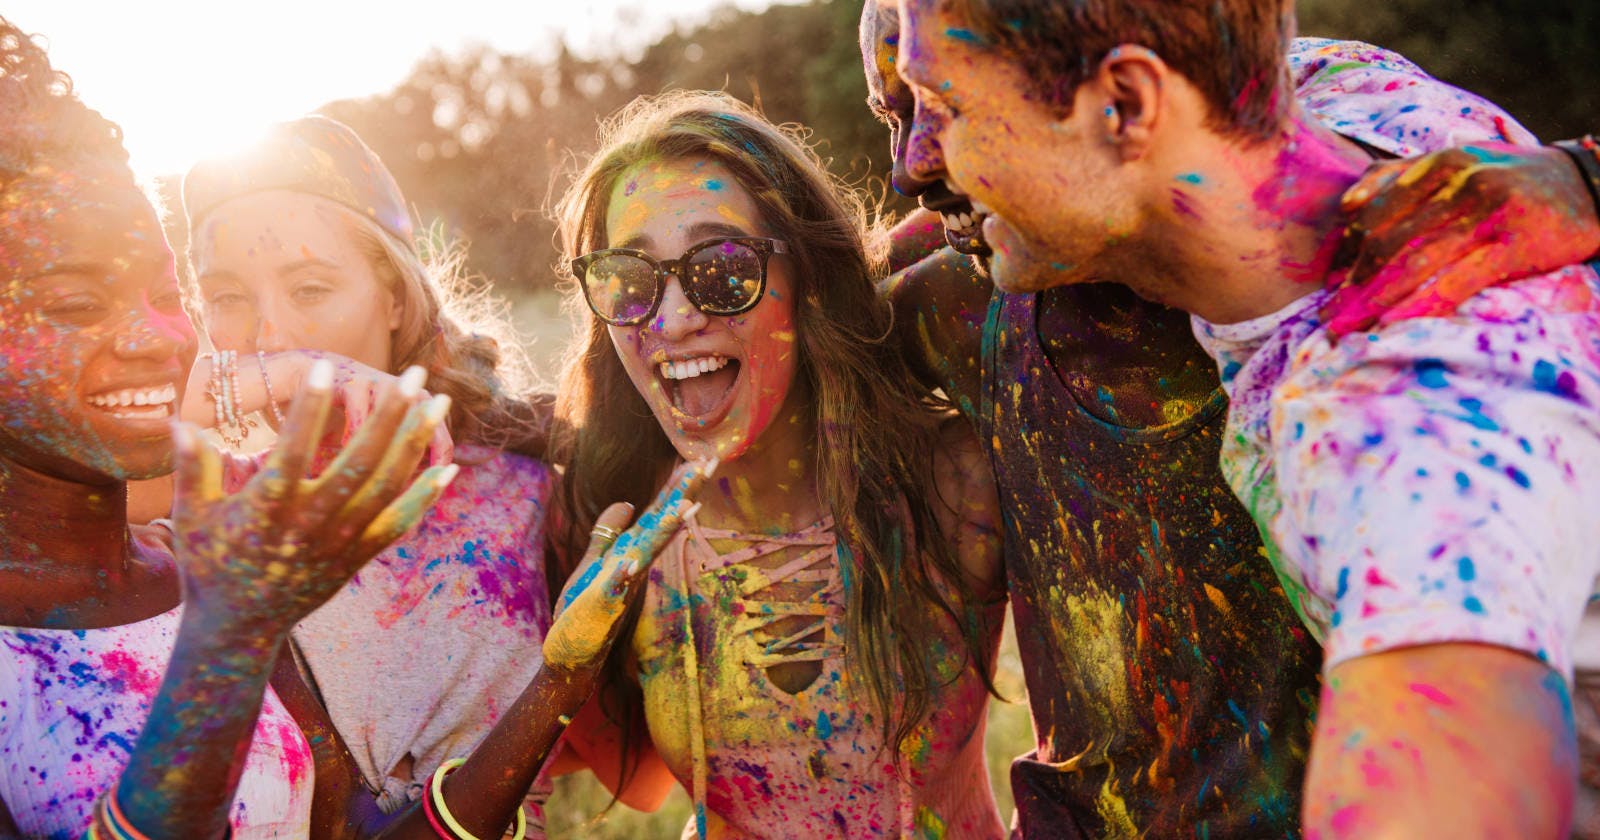 International People Pour Colourful Powder on Each Other Celebrating Holi Spring Colours and Love. jpg